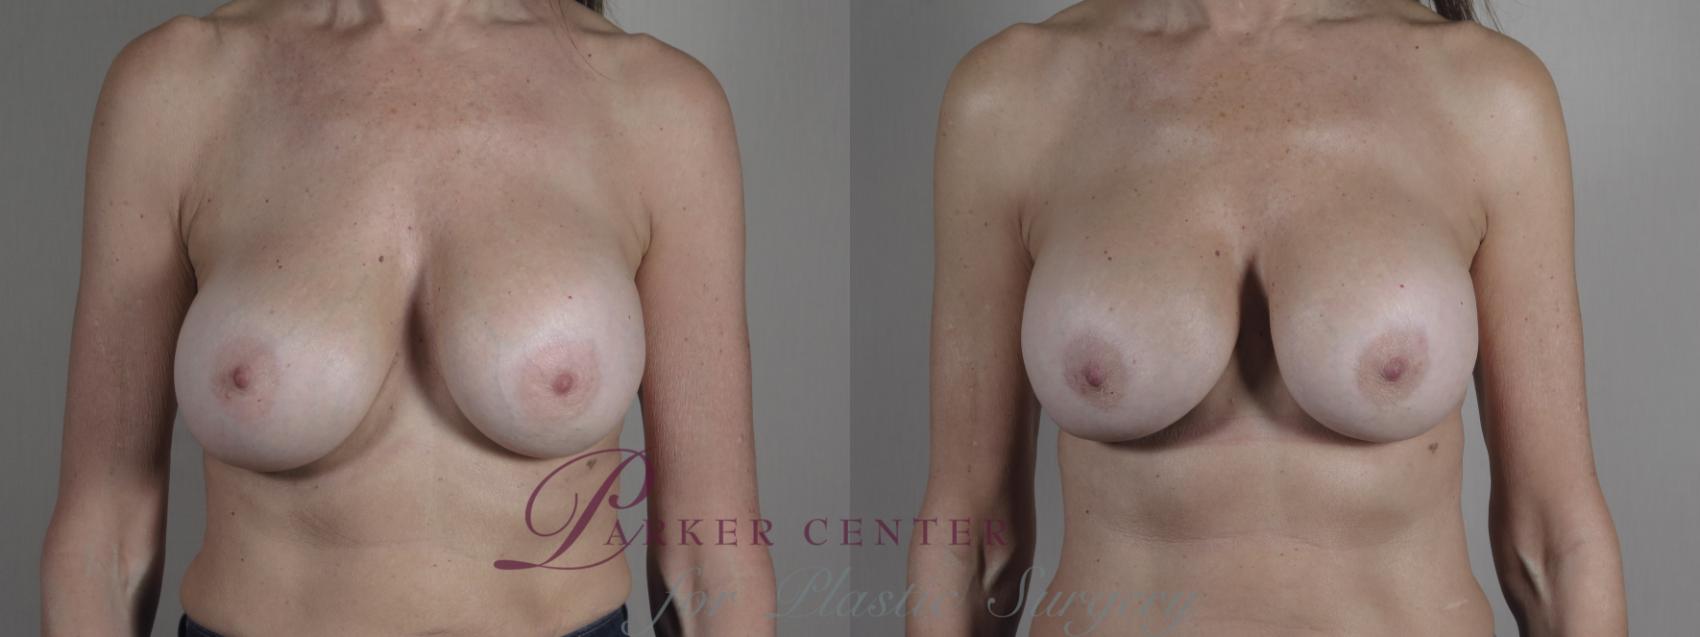 Breast Implant Revision Case 1025 Before & After Front | Paramus, NJ | Parker Center for Plastic Surgery